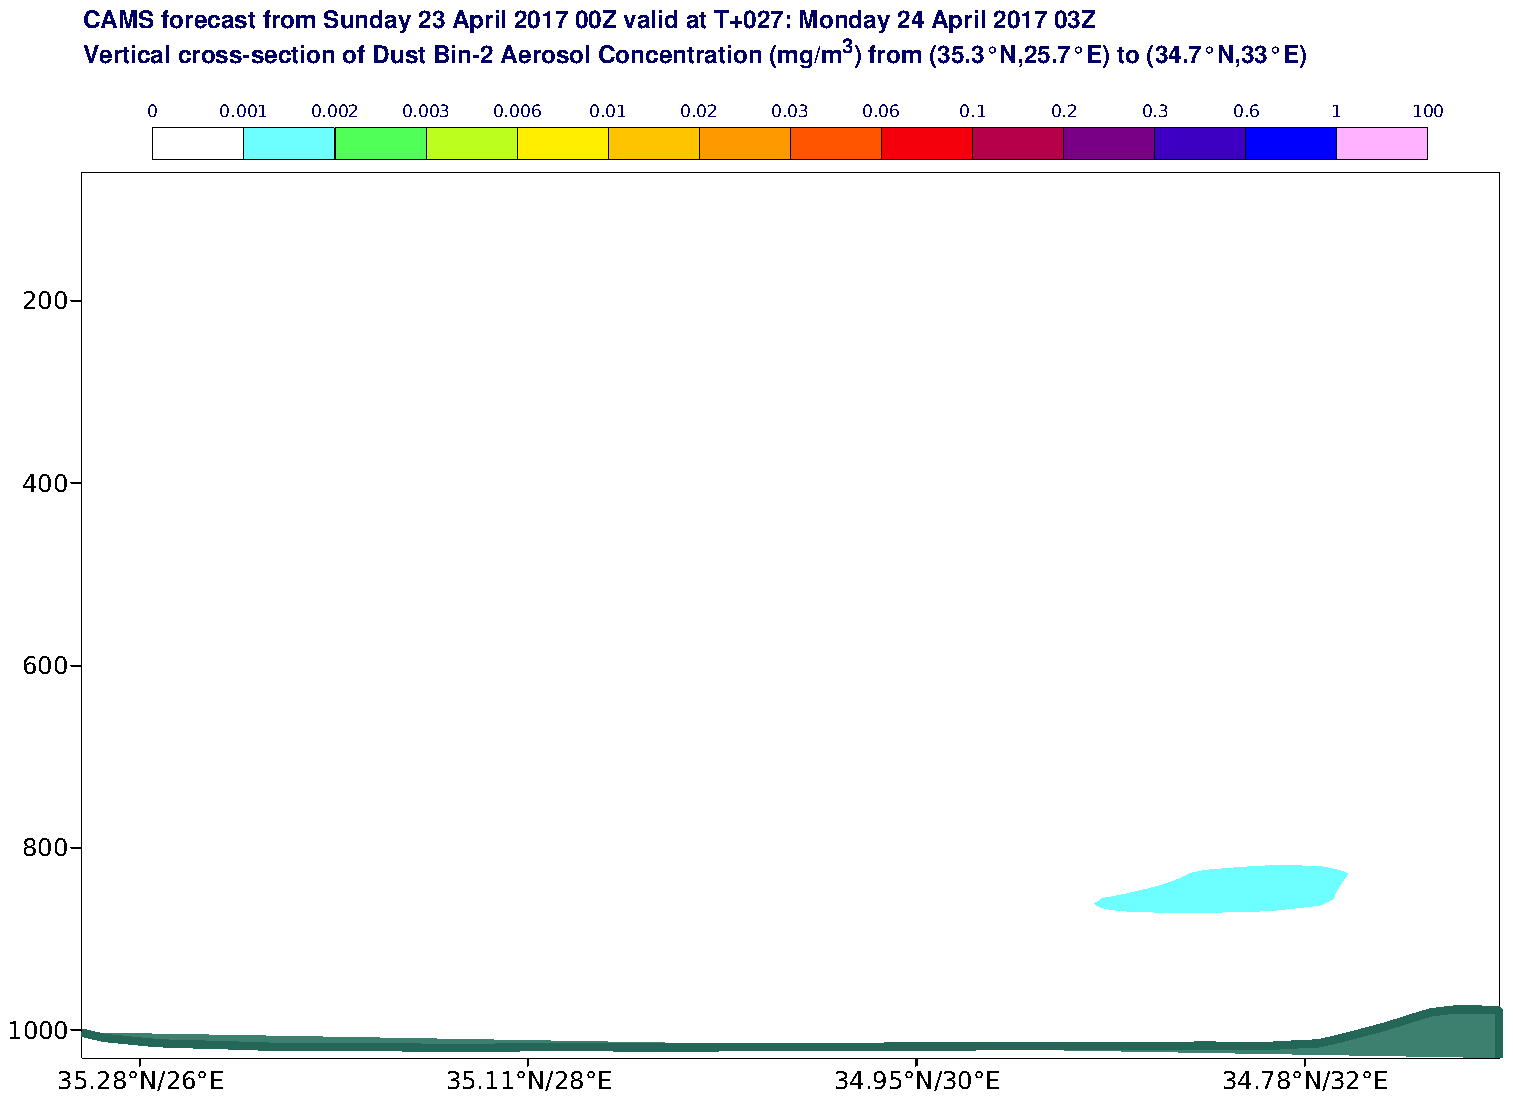 Vertical cross-section of Dust Bin-2 Aerosol Concentration (mg/m3) valid at T27 - 2017-04-24 03:00